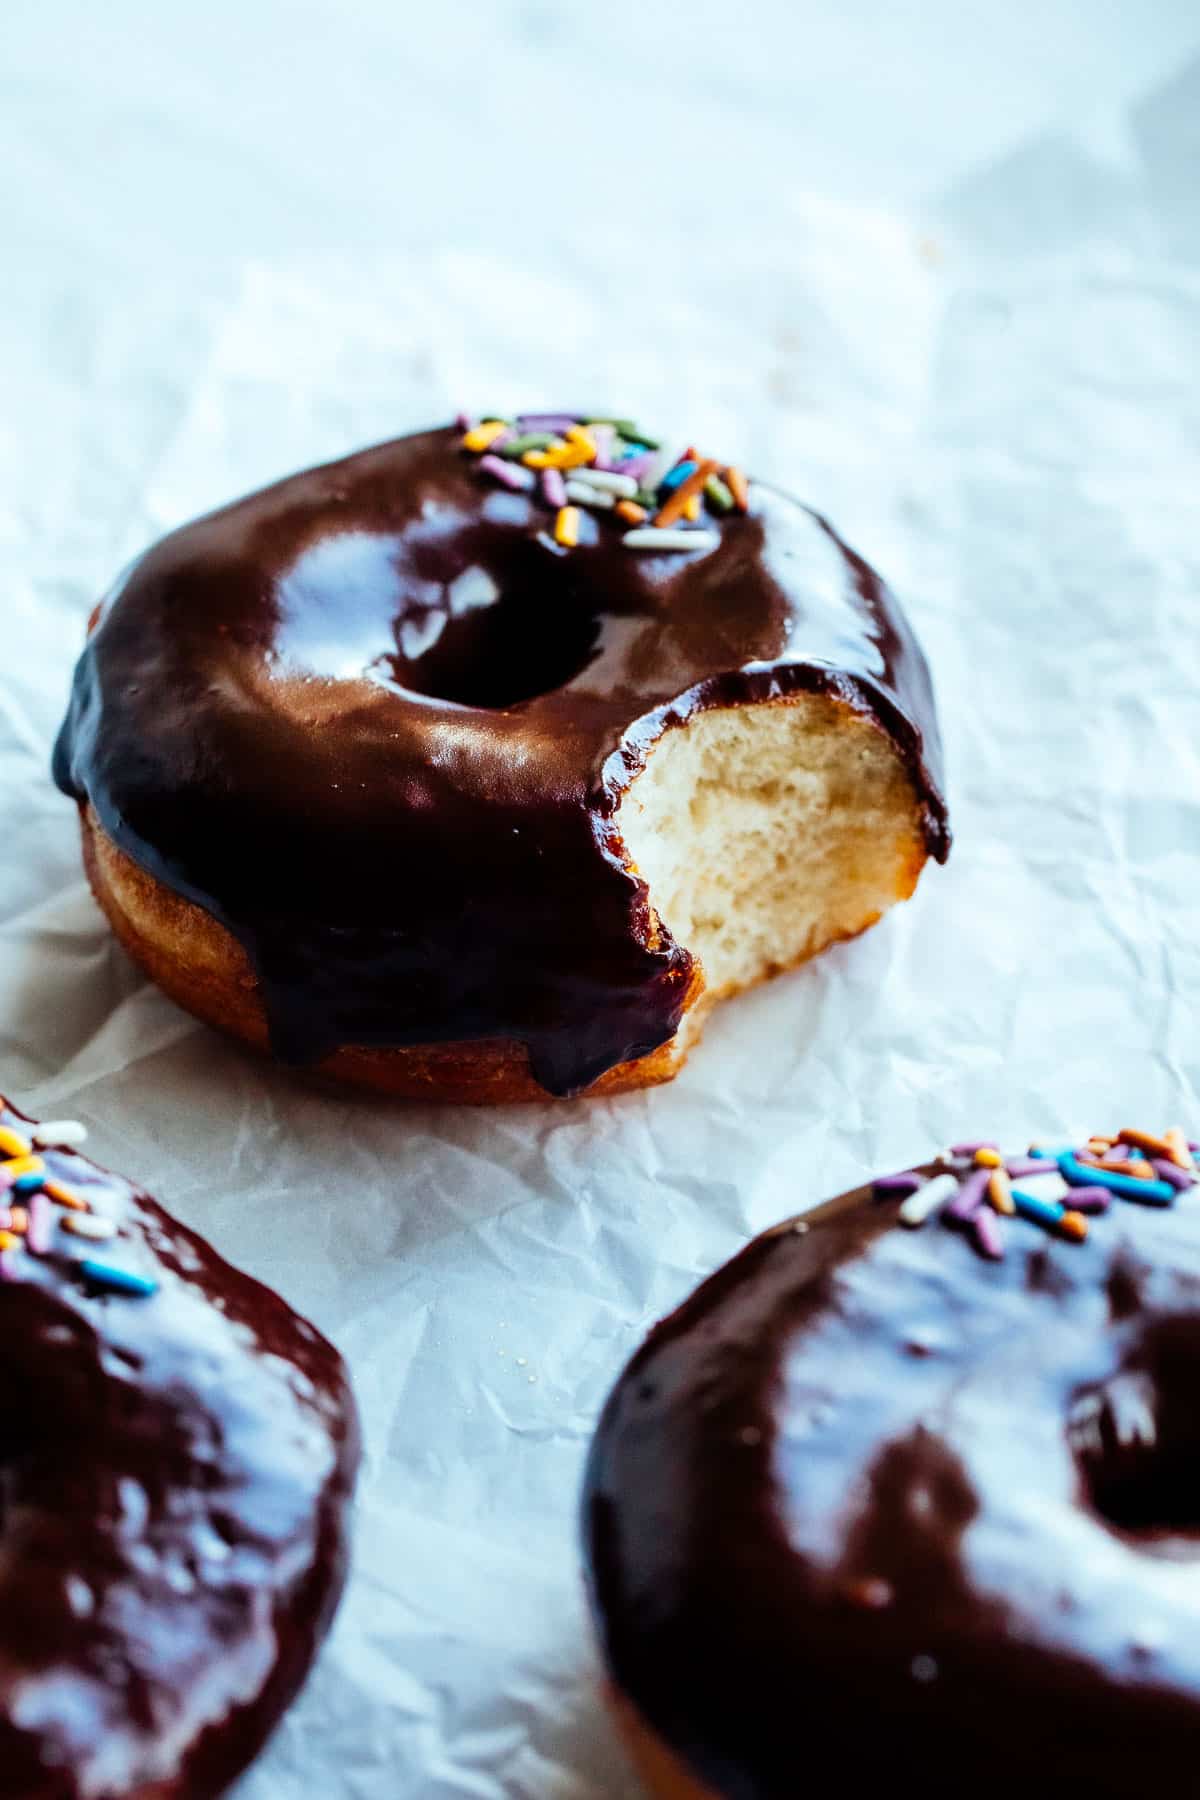 vegan chocolate glaze doughnuts with sprinkles bit into from the side